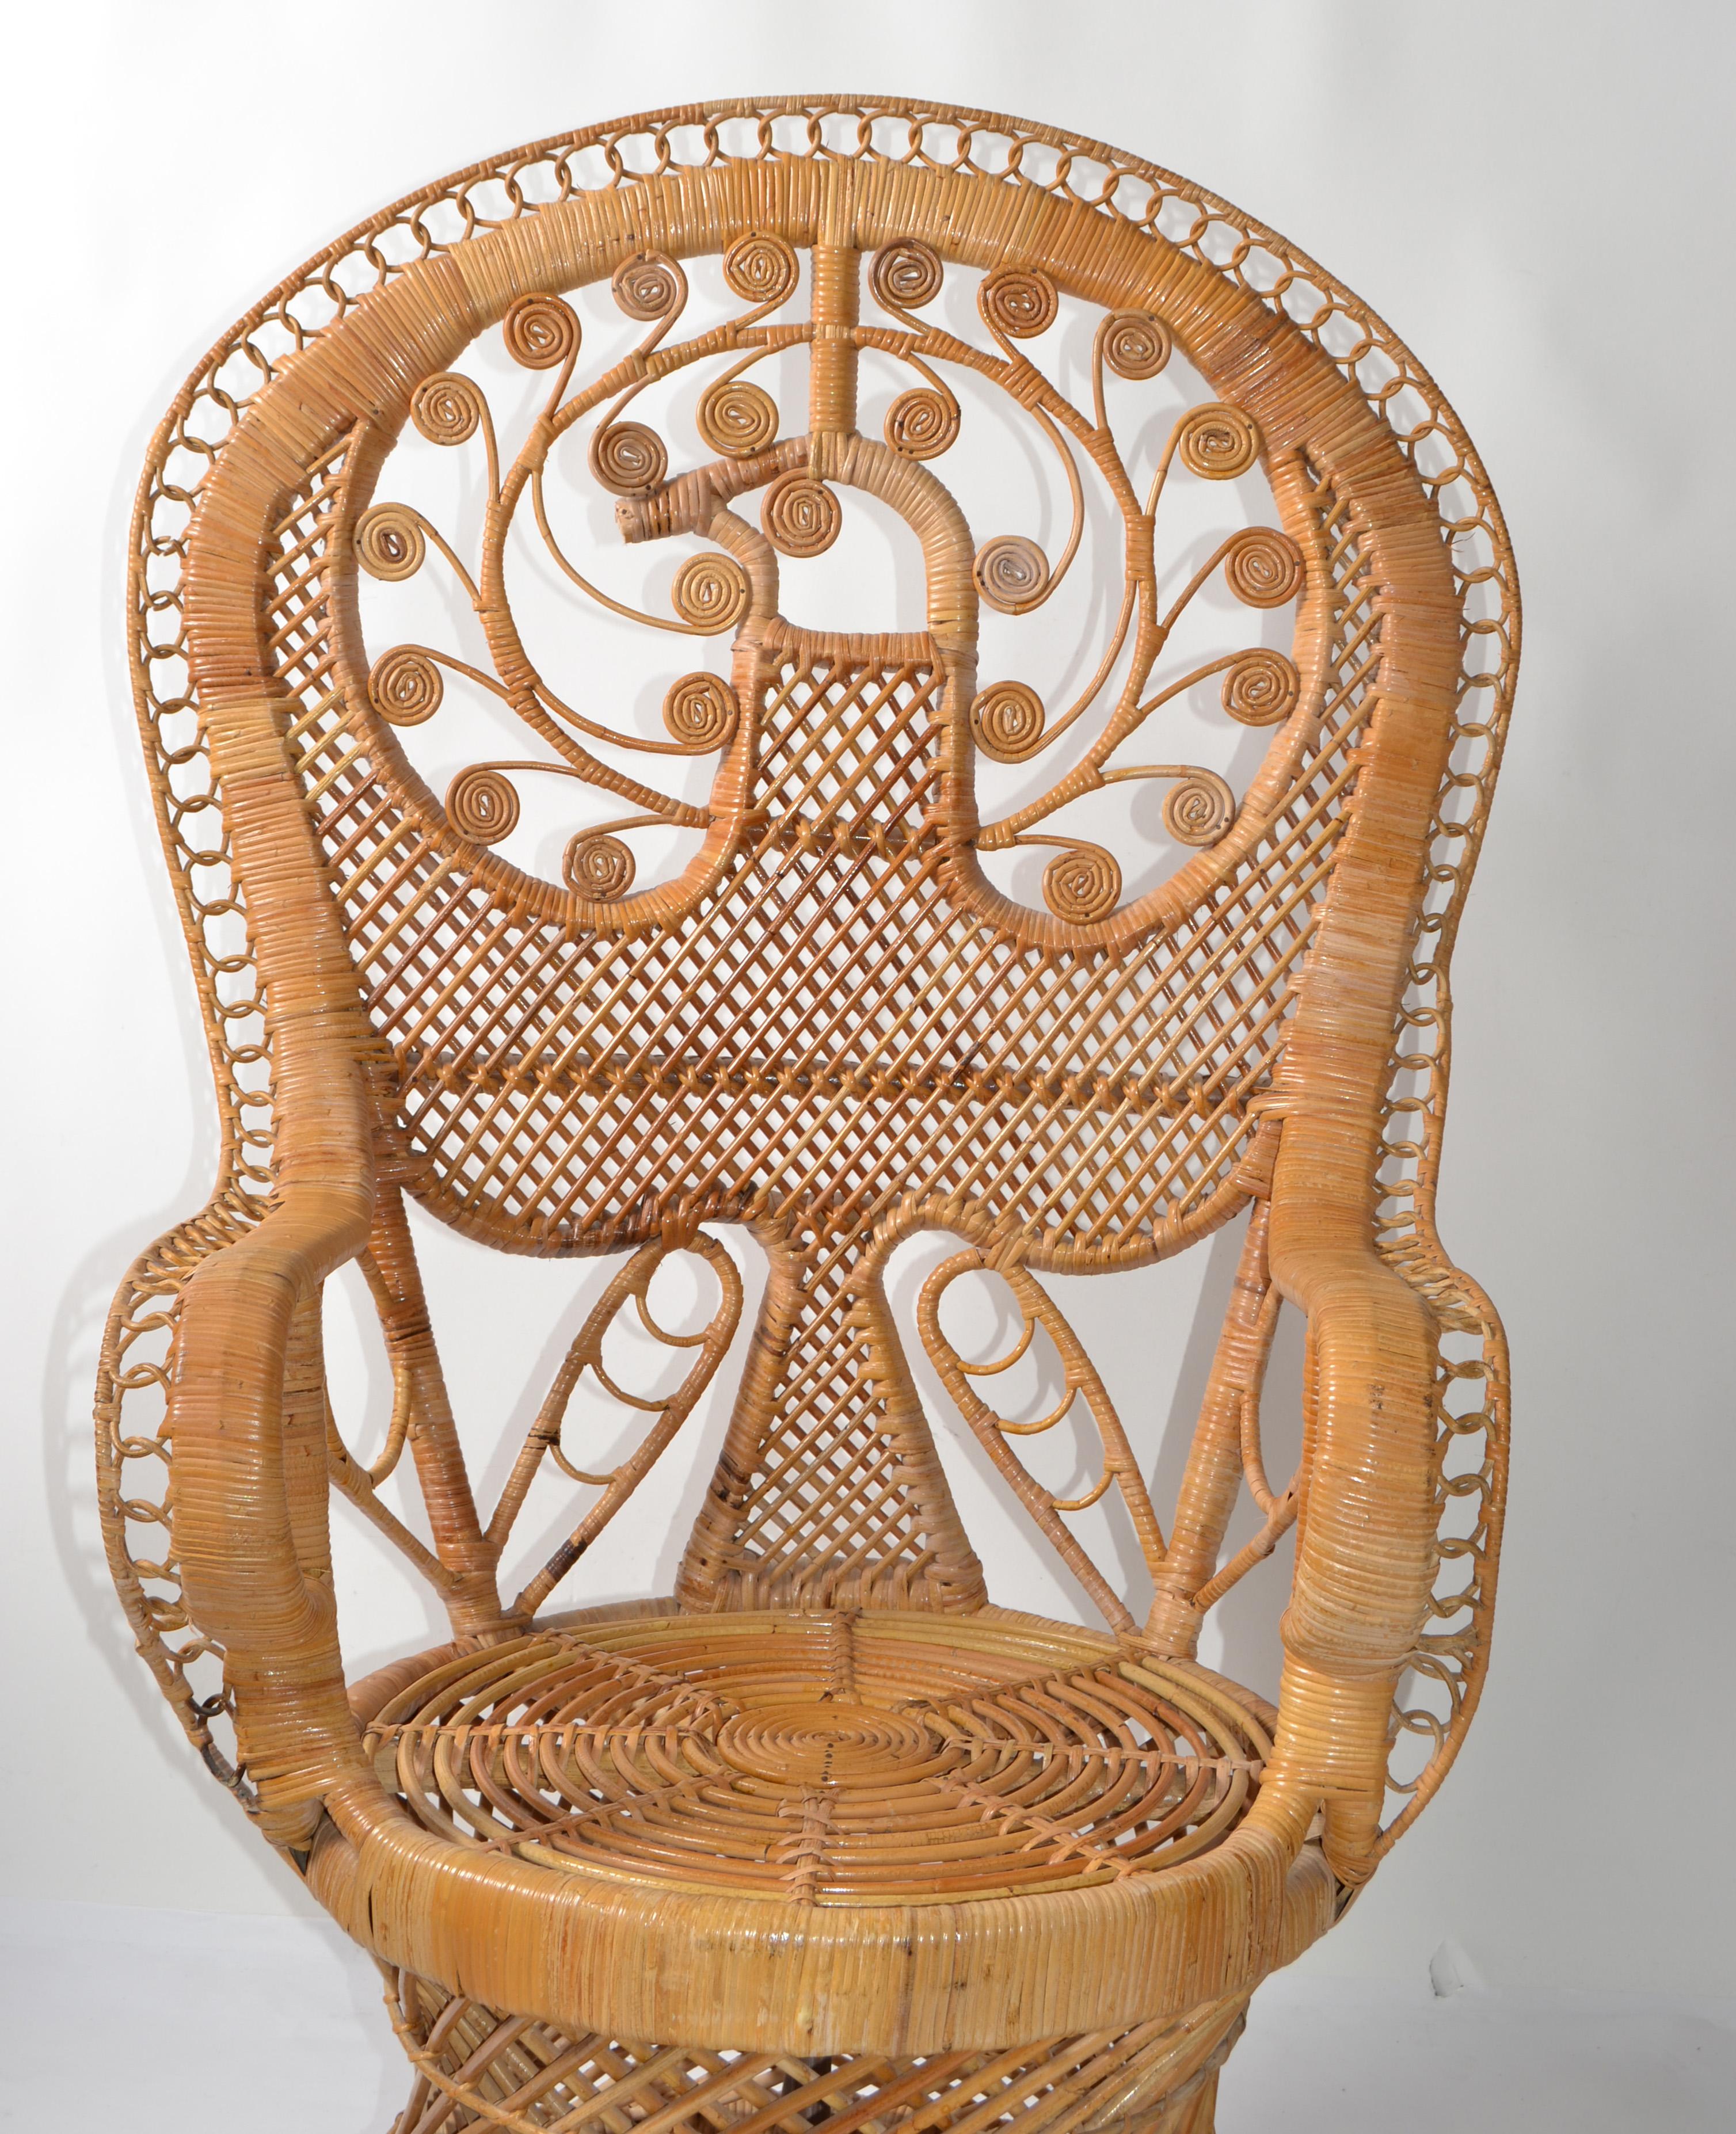 Hand-Crafted Coastal Vintage Round Rattan Accent Table Hand-Woven Wicker Caning Peacock Chair For Sale